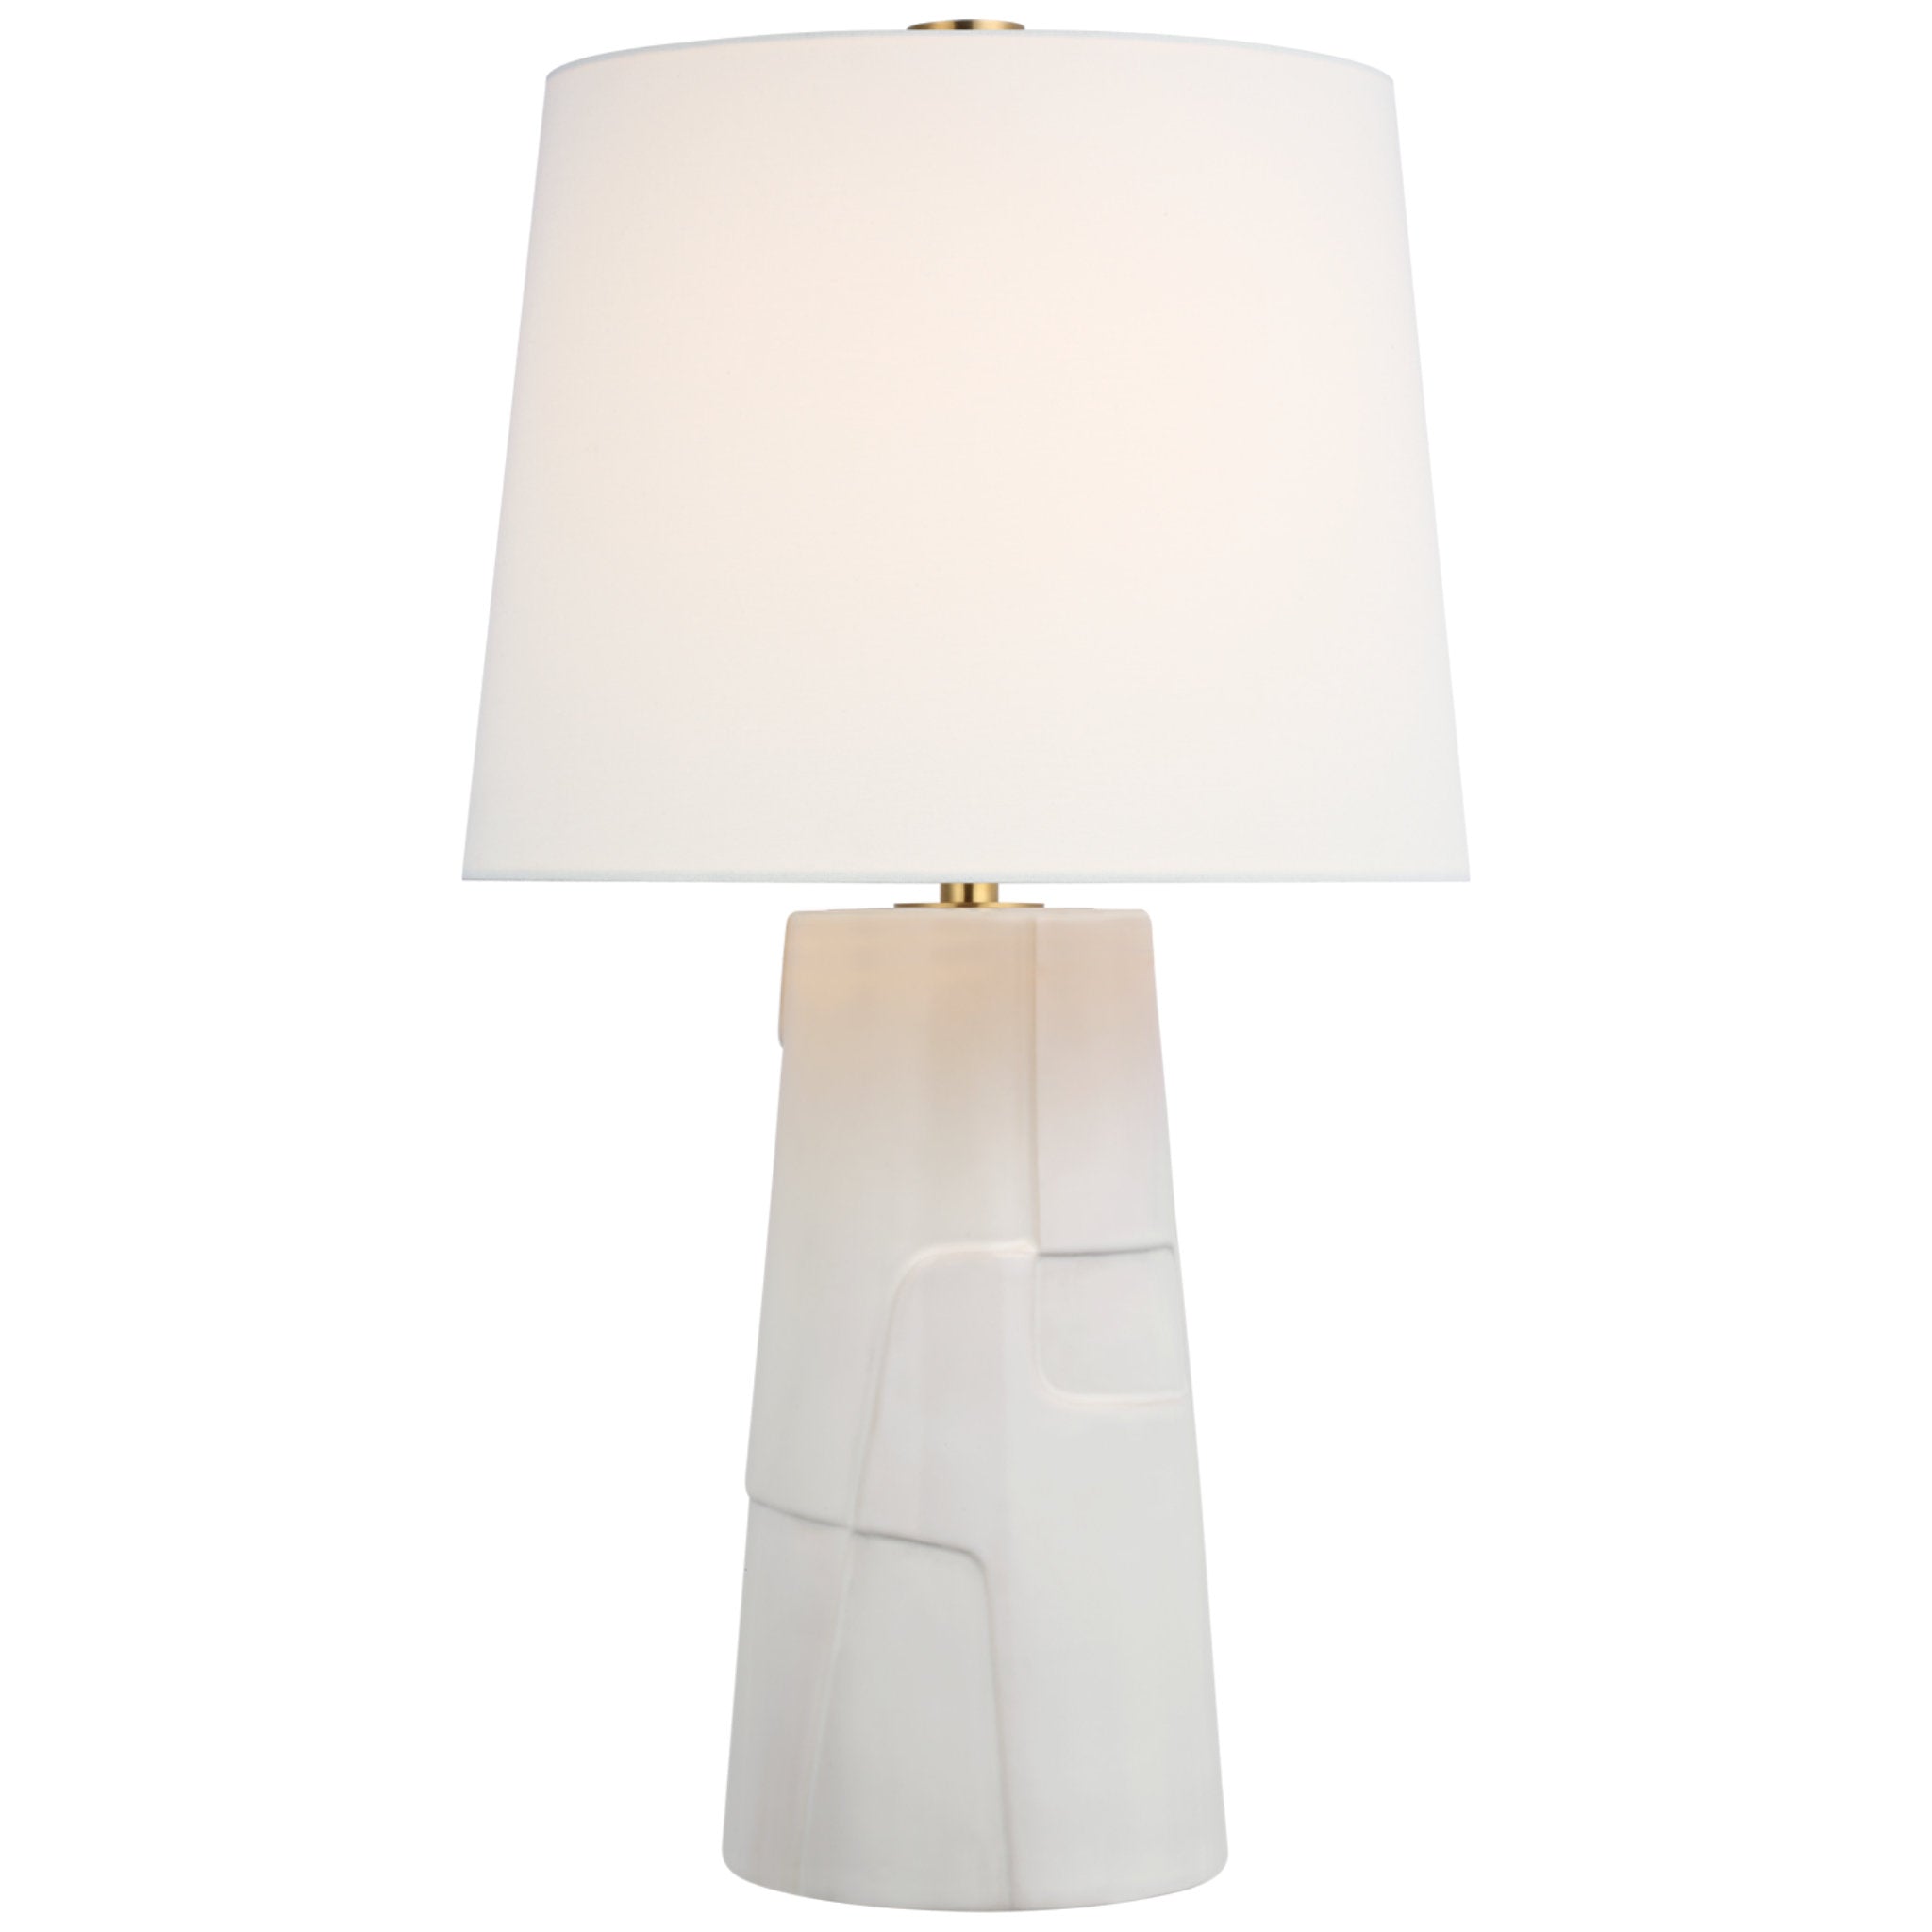 Barbara Barry Braque Medium Debossed Table Lamp in Mixed White with Linen Shade